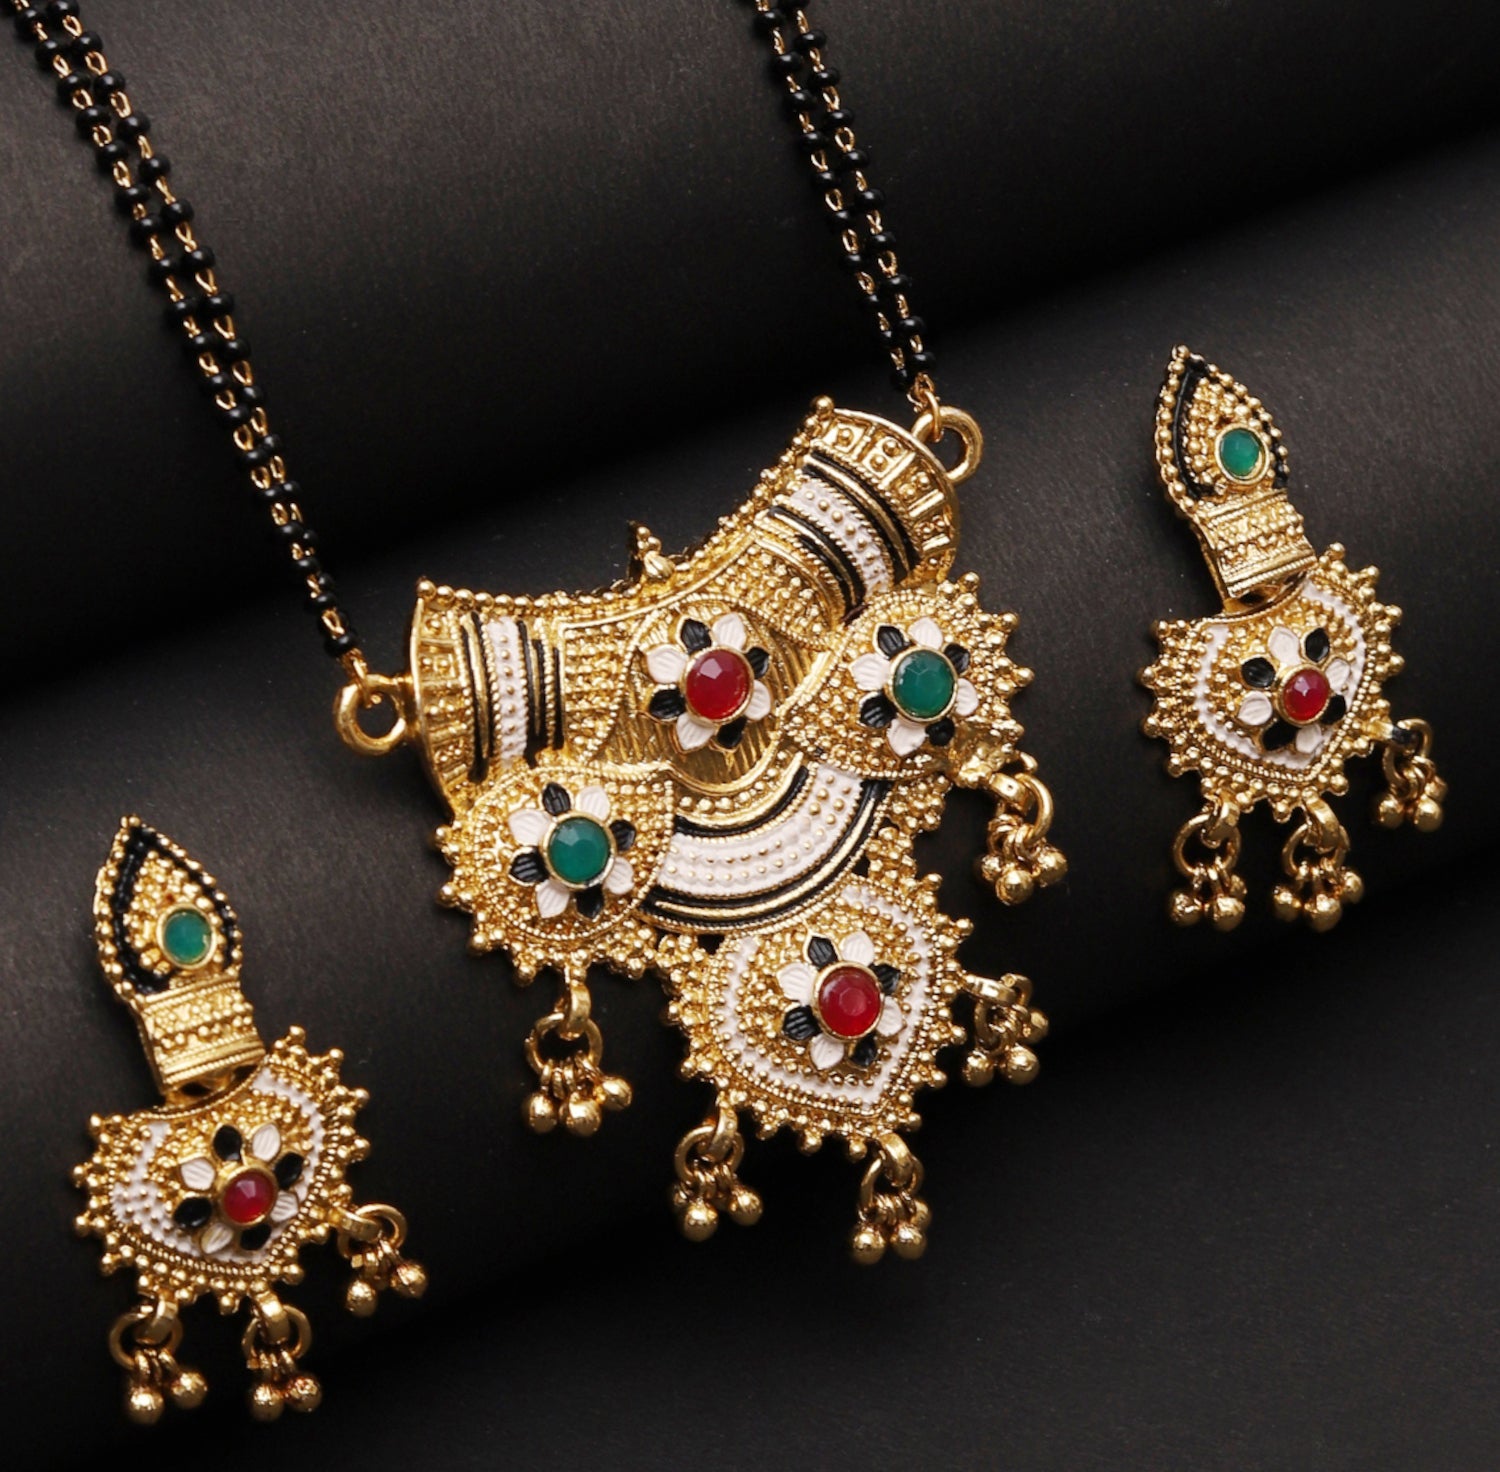 Mekkna Women's Pride Gold Plated Mangalsutra with Earrings | Buy This Jewellery Online from Mekkna.